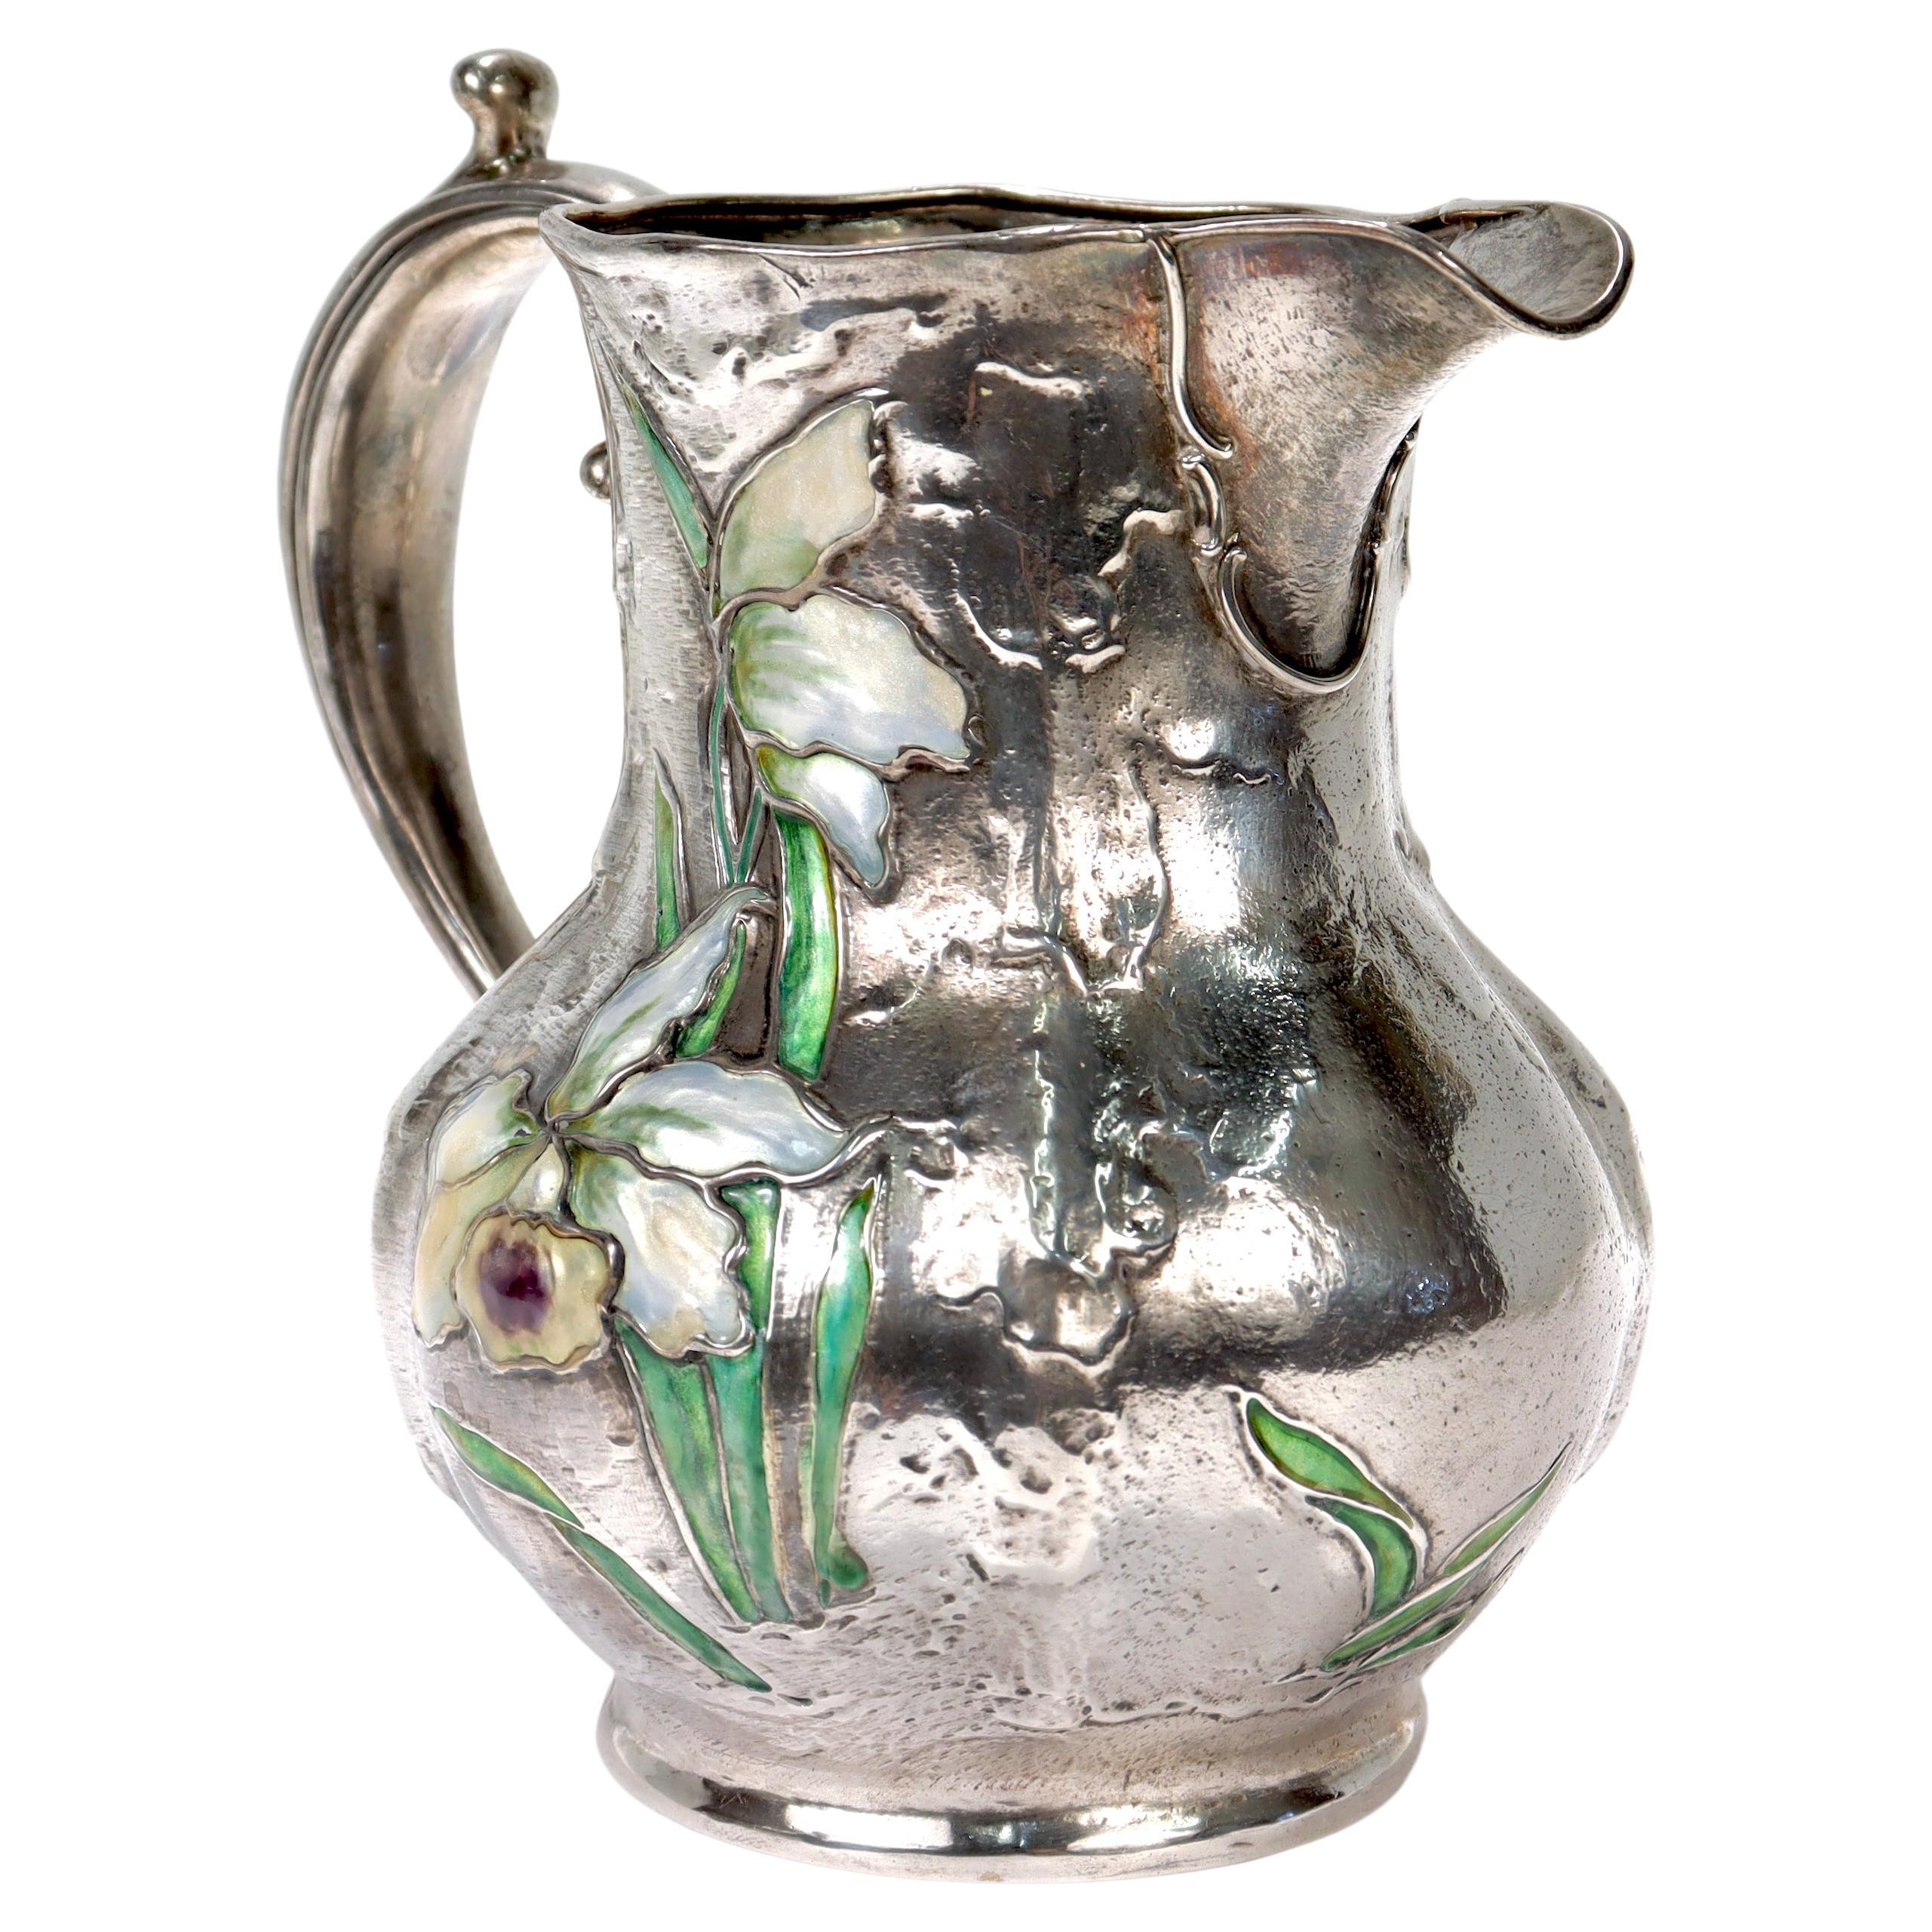 An extremely rare, antique Art Nouveau sterling silver & enamel pitcher.

By Gorham.

With a hand-hammered body having floral decoration to both sides. 

The front side is decorated with polychrome enamels.

Gorham produced a very limited series of